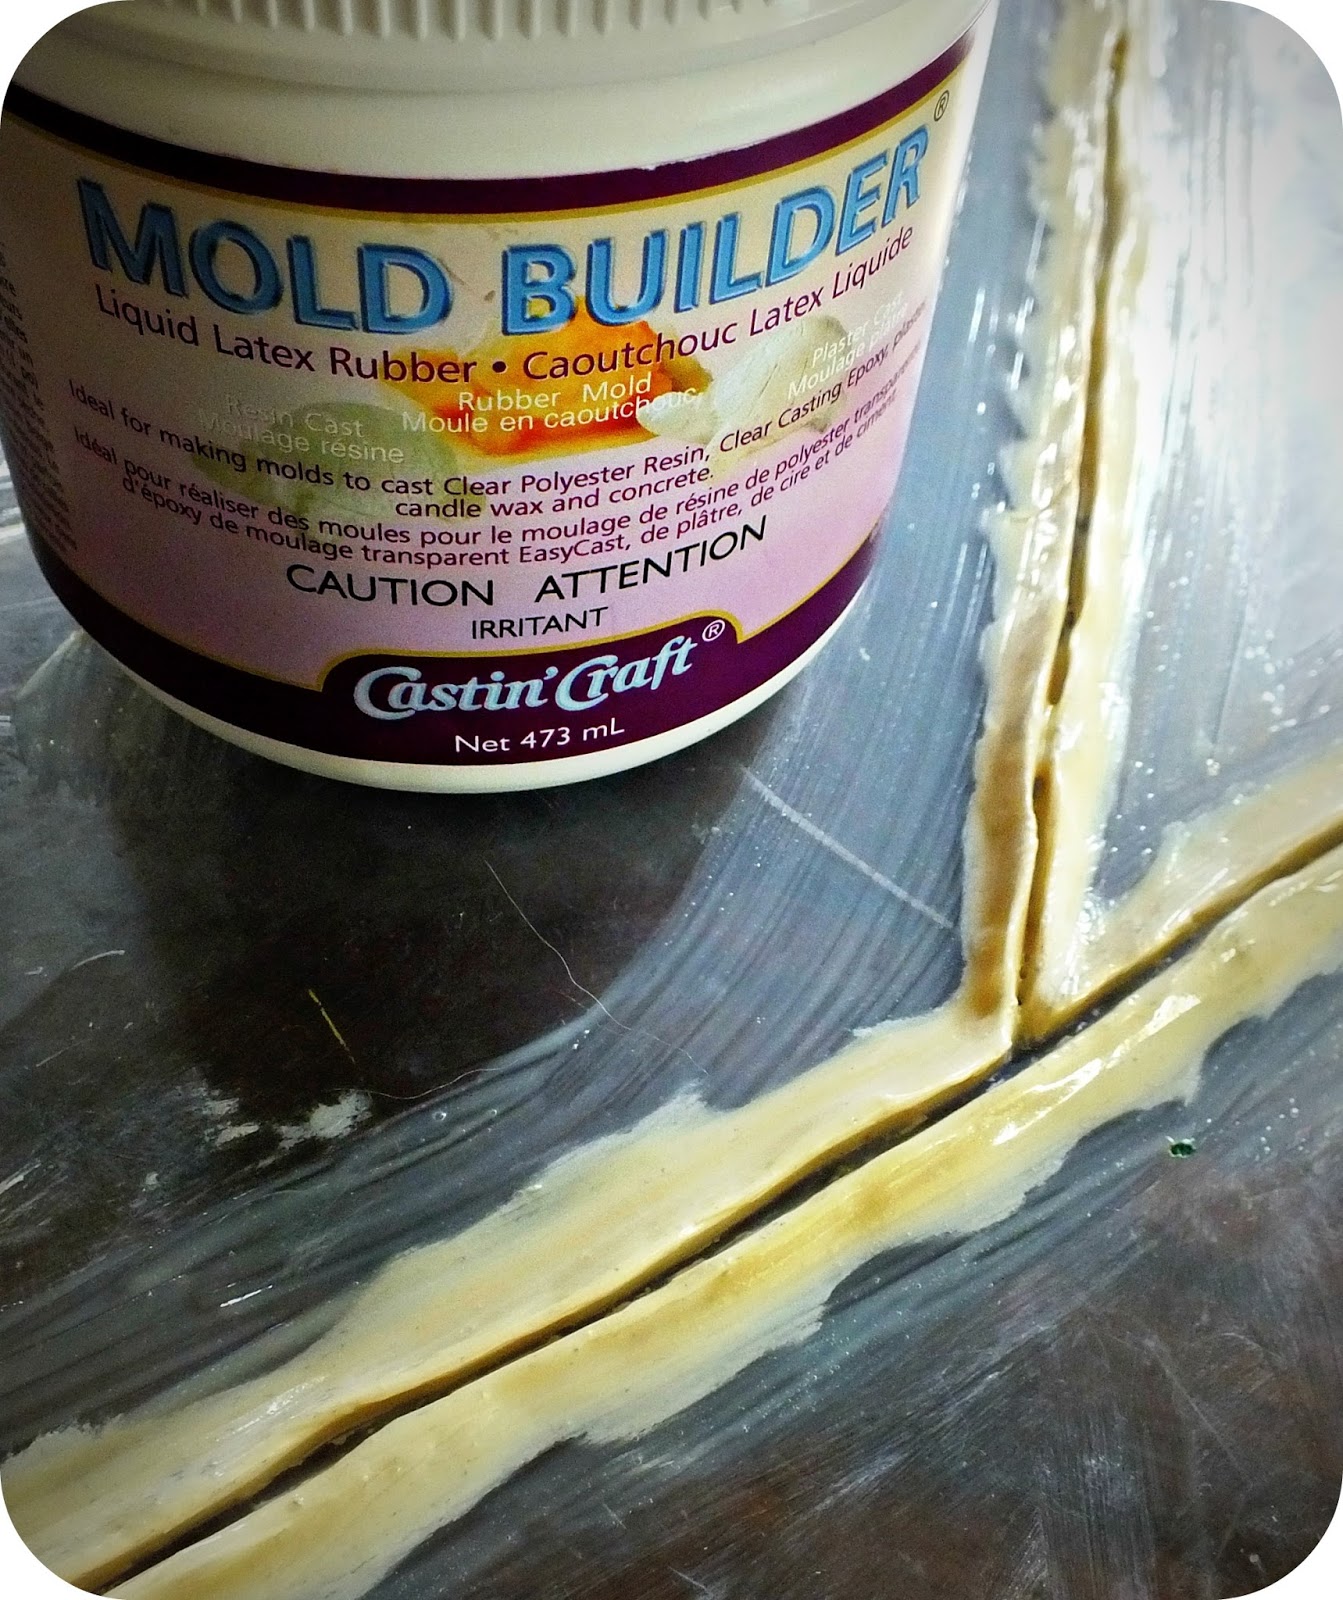 How to Use Mold Builder Liquid Latex Rubber 